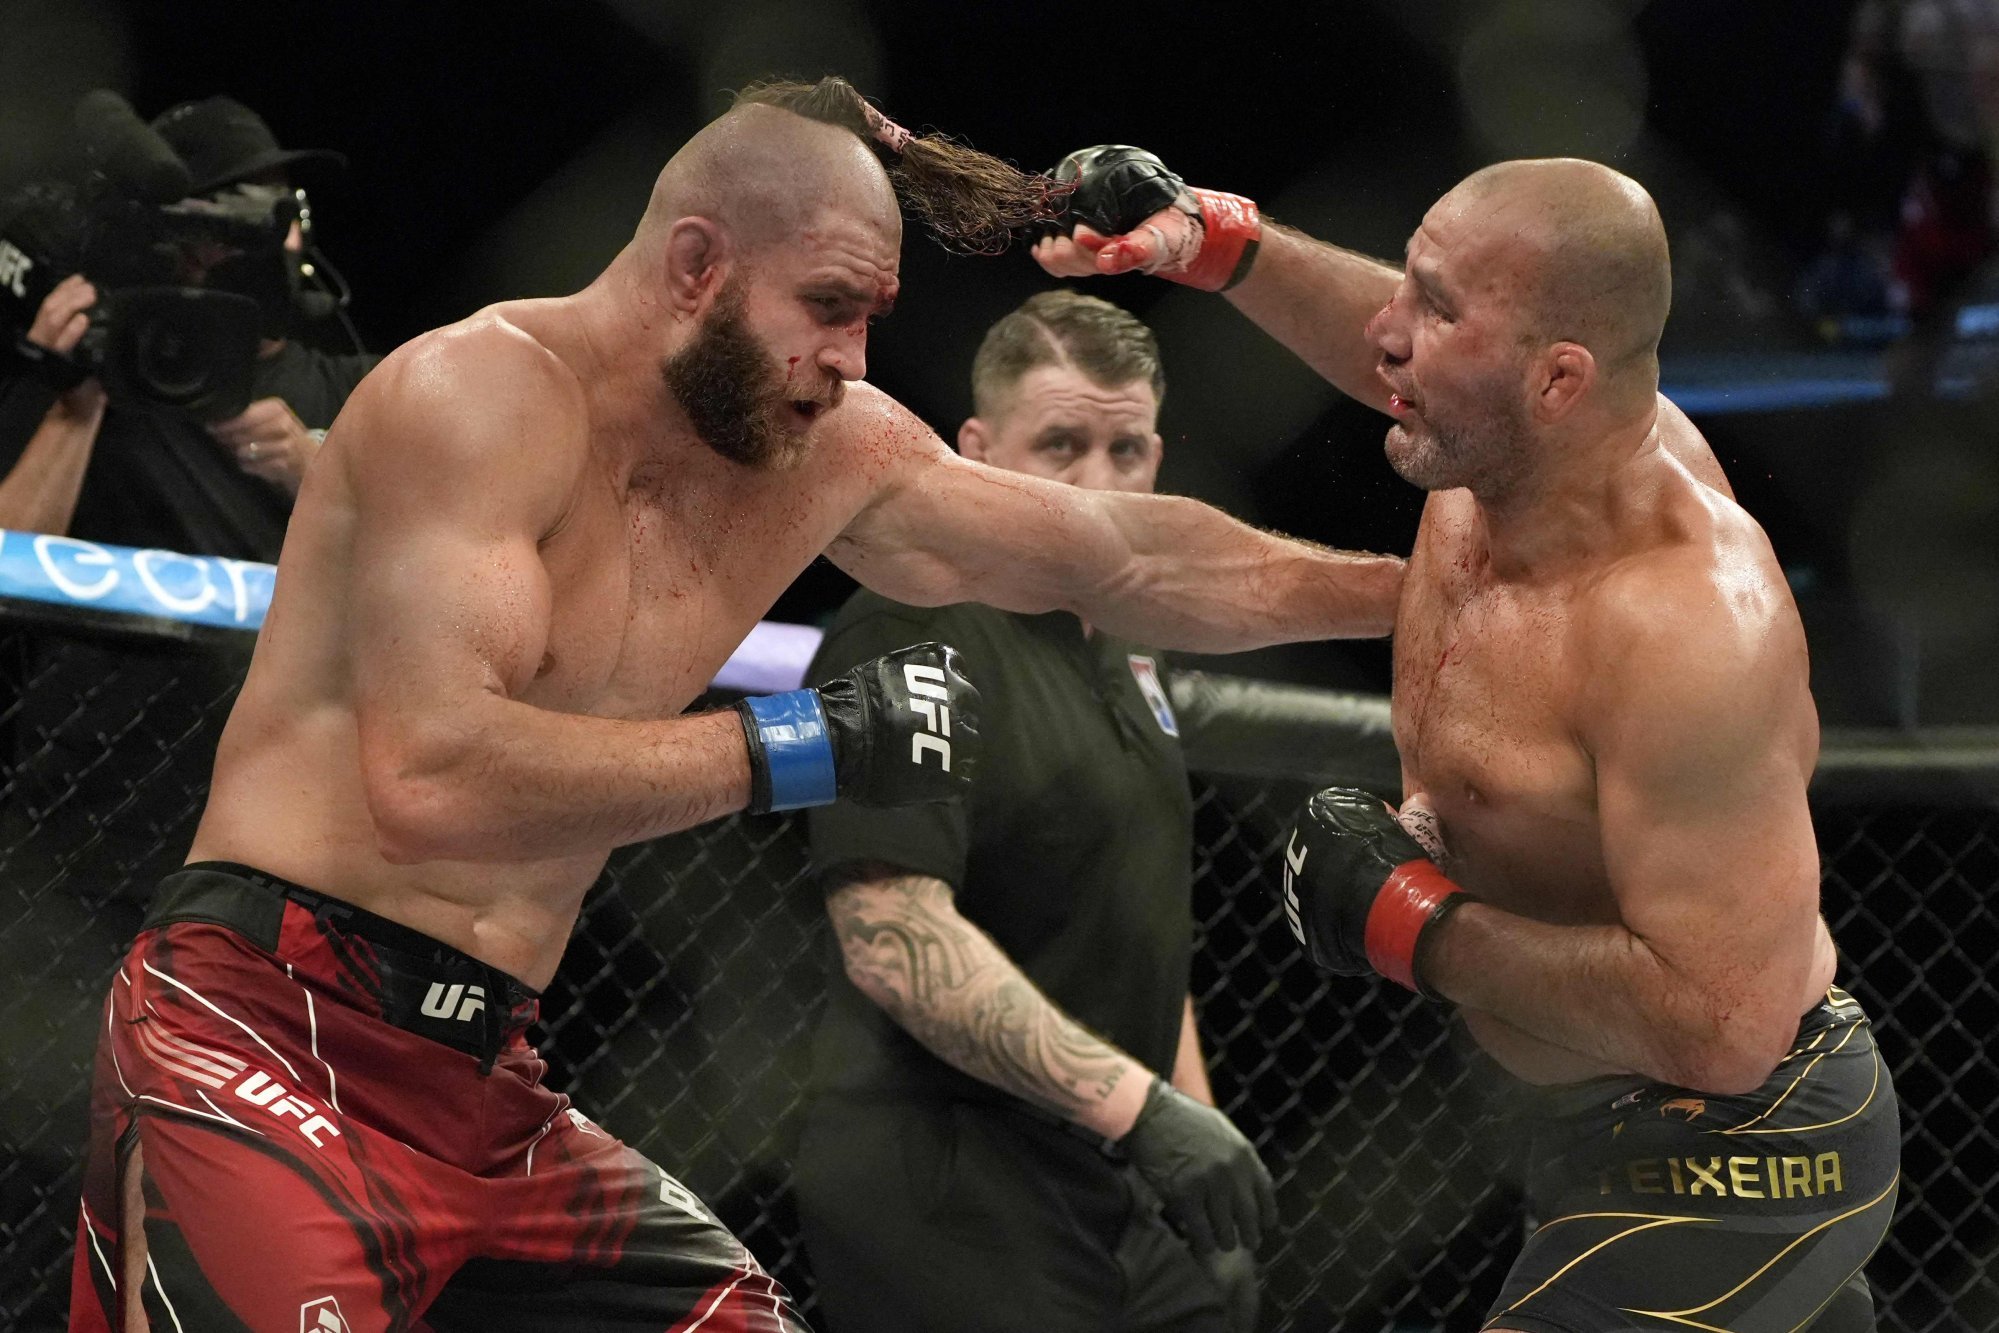 Captures How Visceral Mixed Martial Arts Can Be: UFC 5 Preview